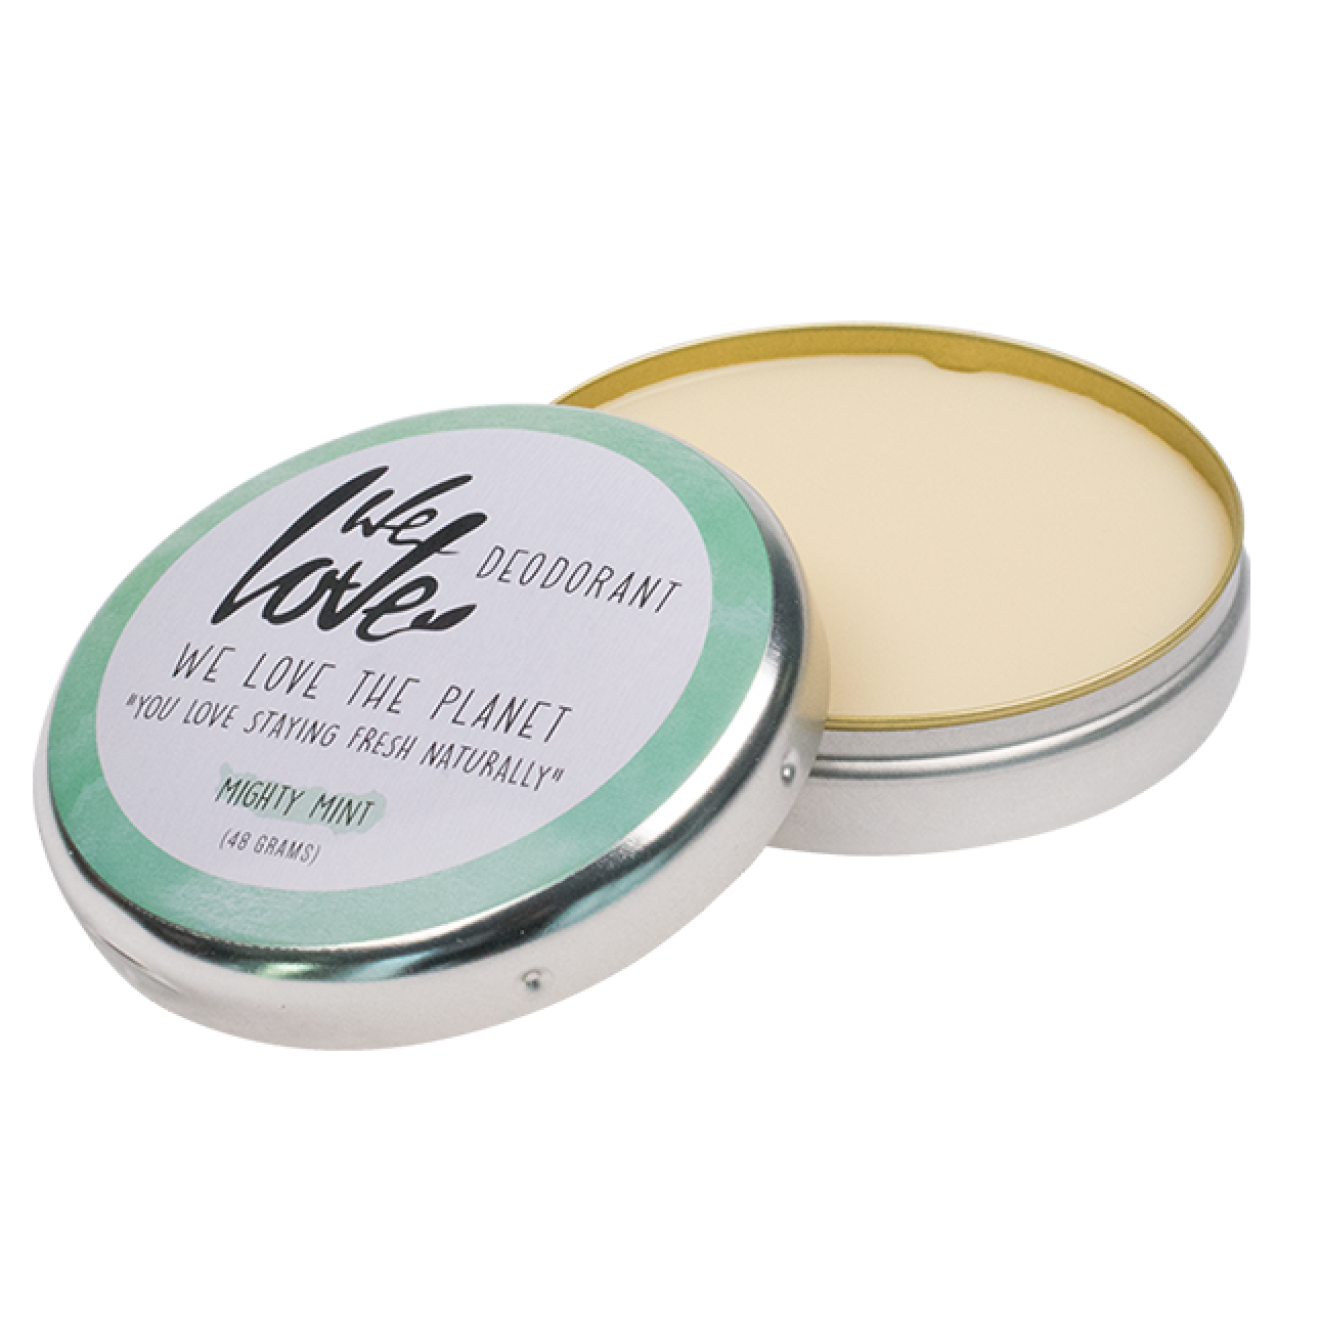 We love the Planet Deocreme Mighty Mint 48 g